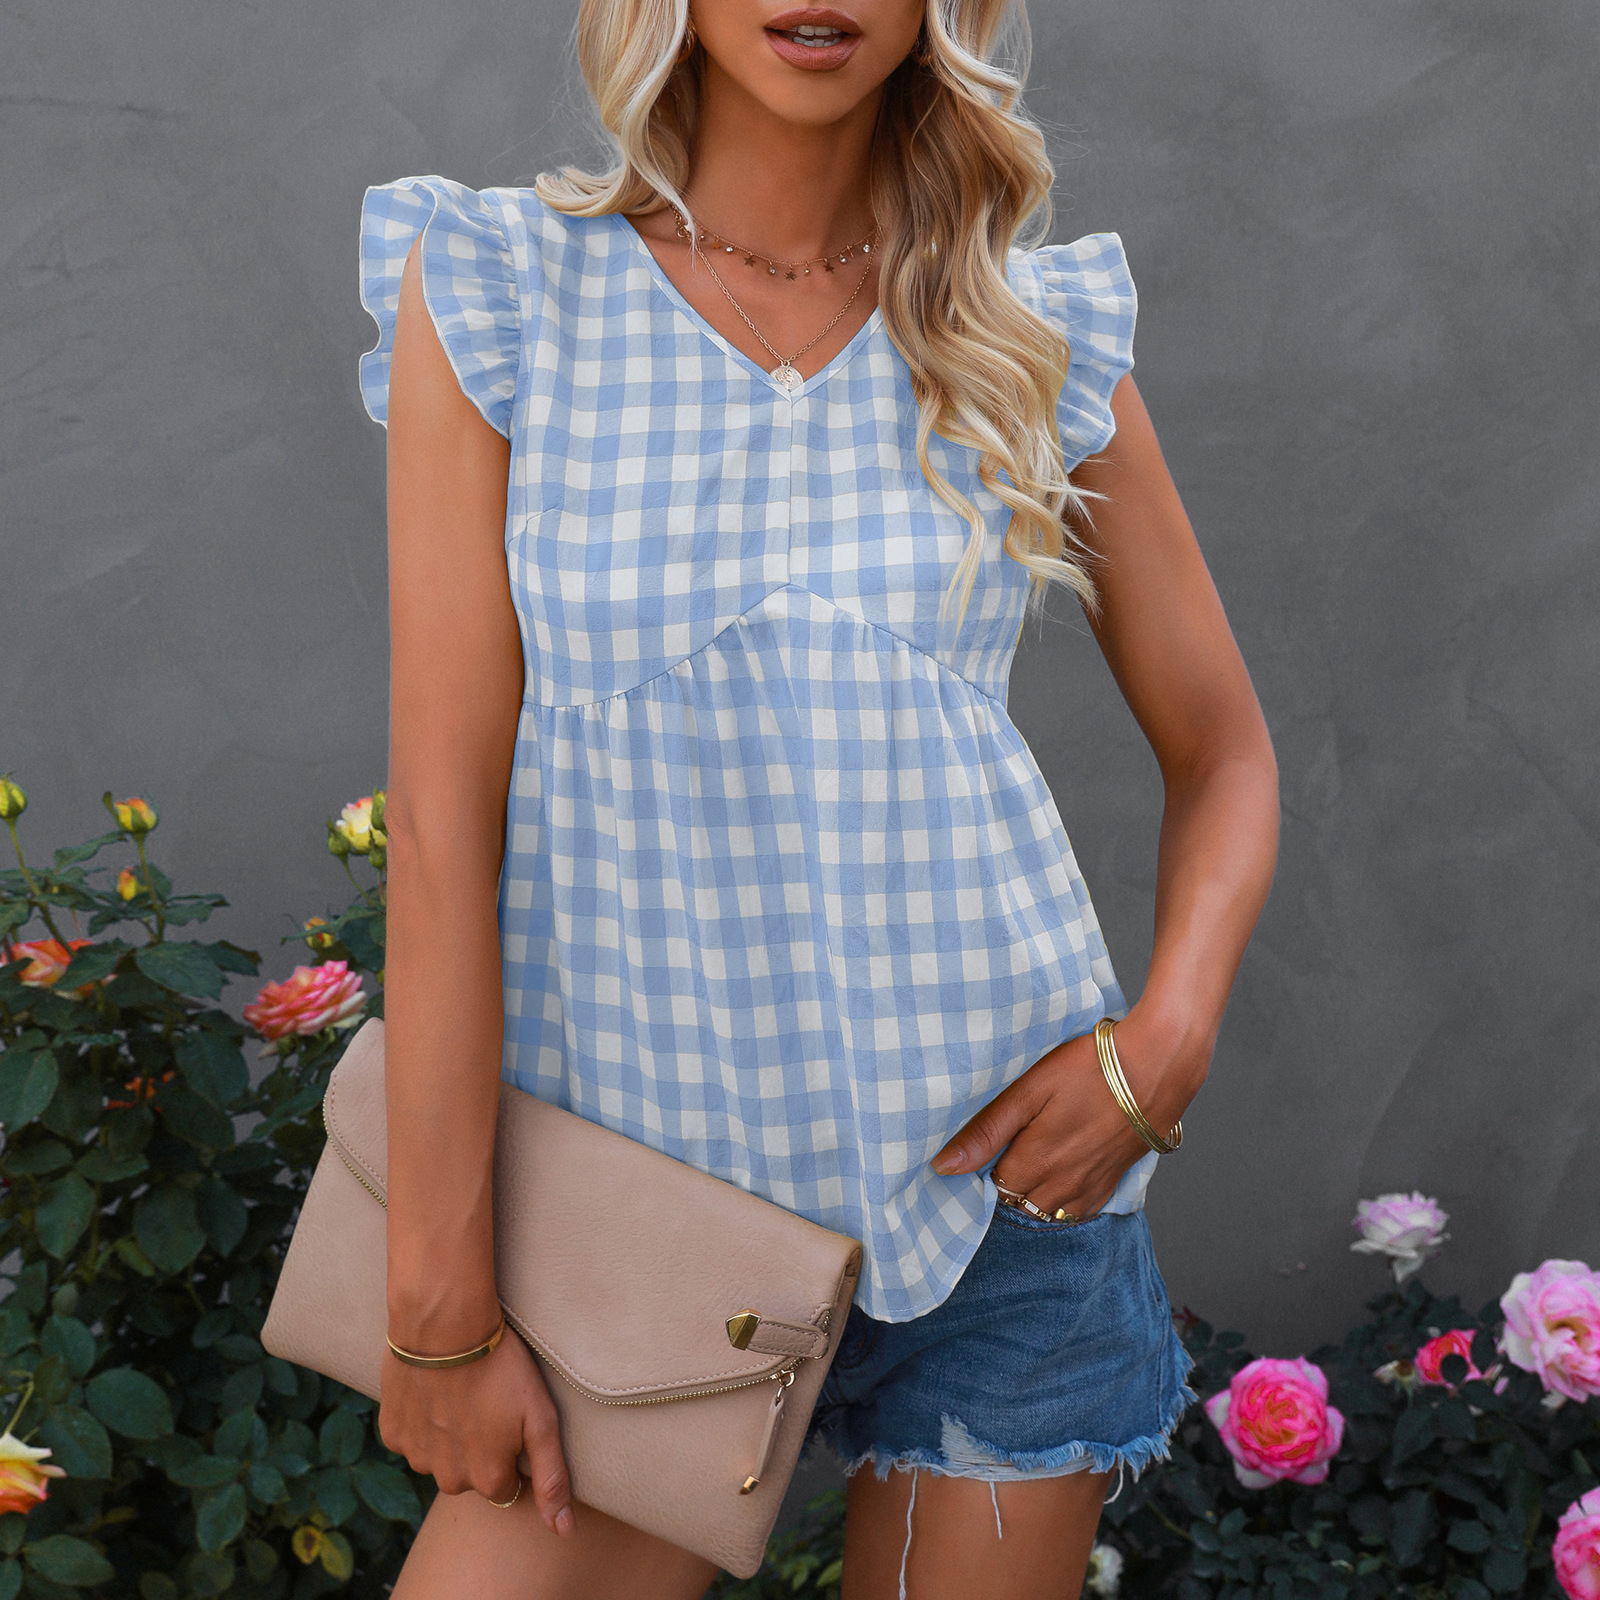 Amazon Cross-border European And American Women's Clothing 2022 Summer Clothing New Wish Foreign Trade Hot Sale V-neck Sleeveless Plaid Top Women